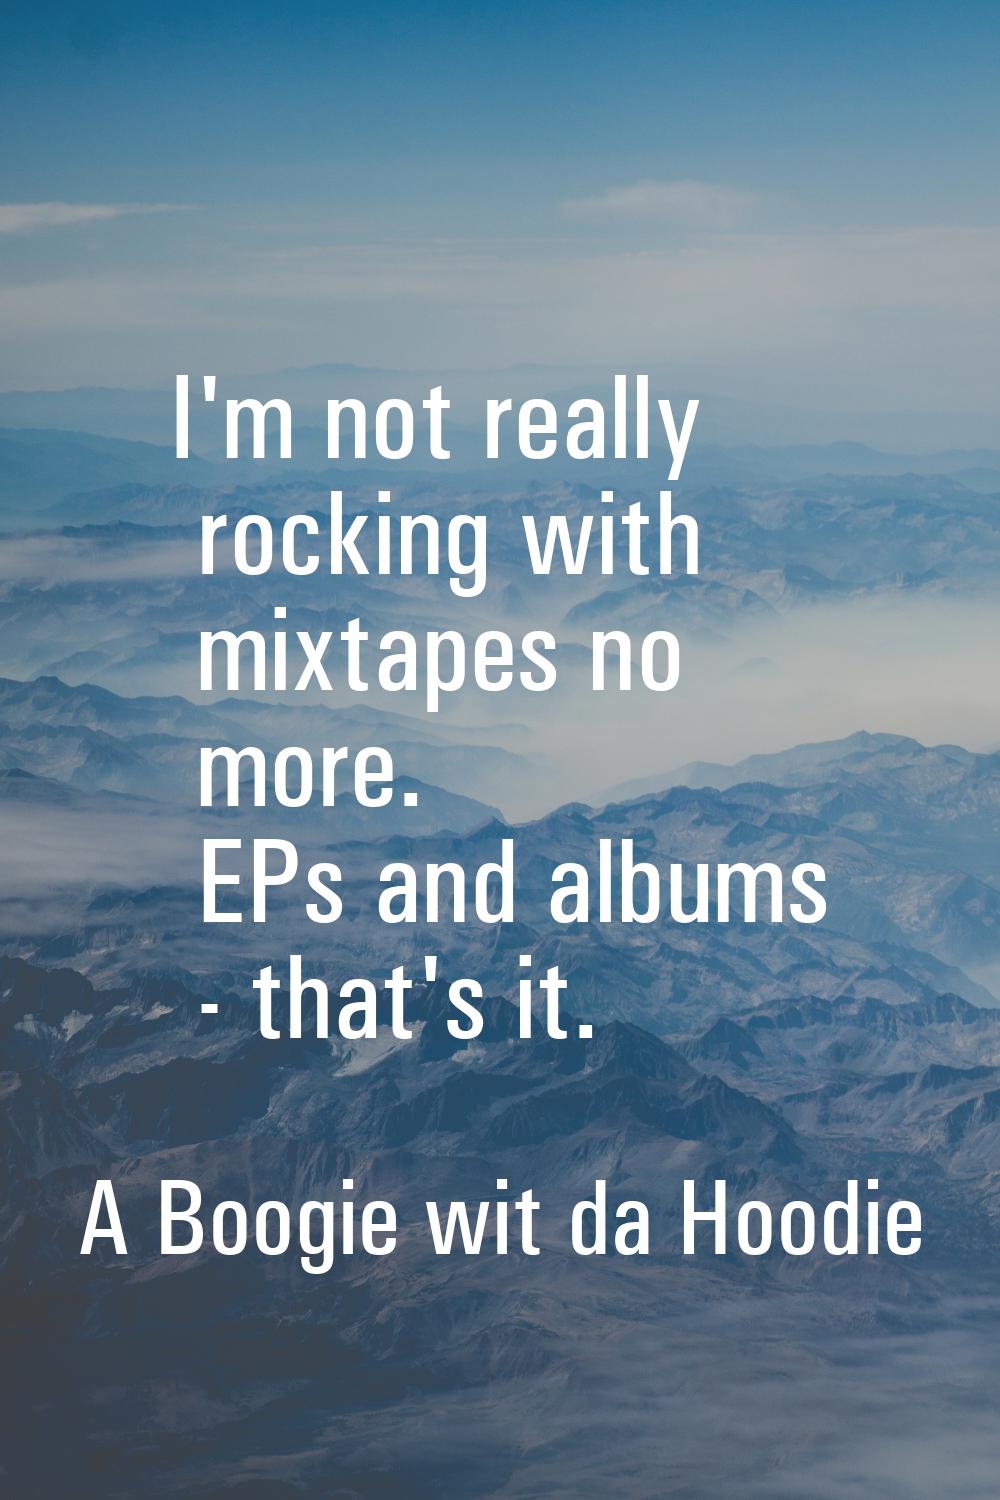 I'm not really rocking with mixtapes no more. EPs and albums - that's it.